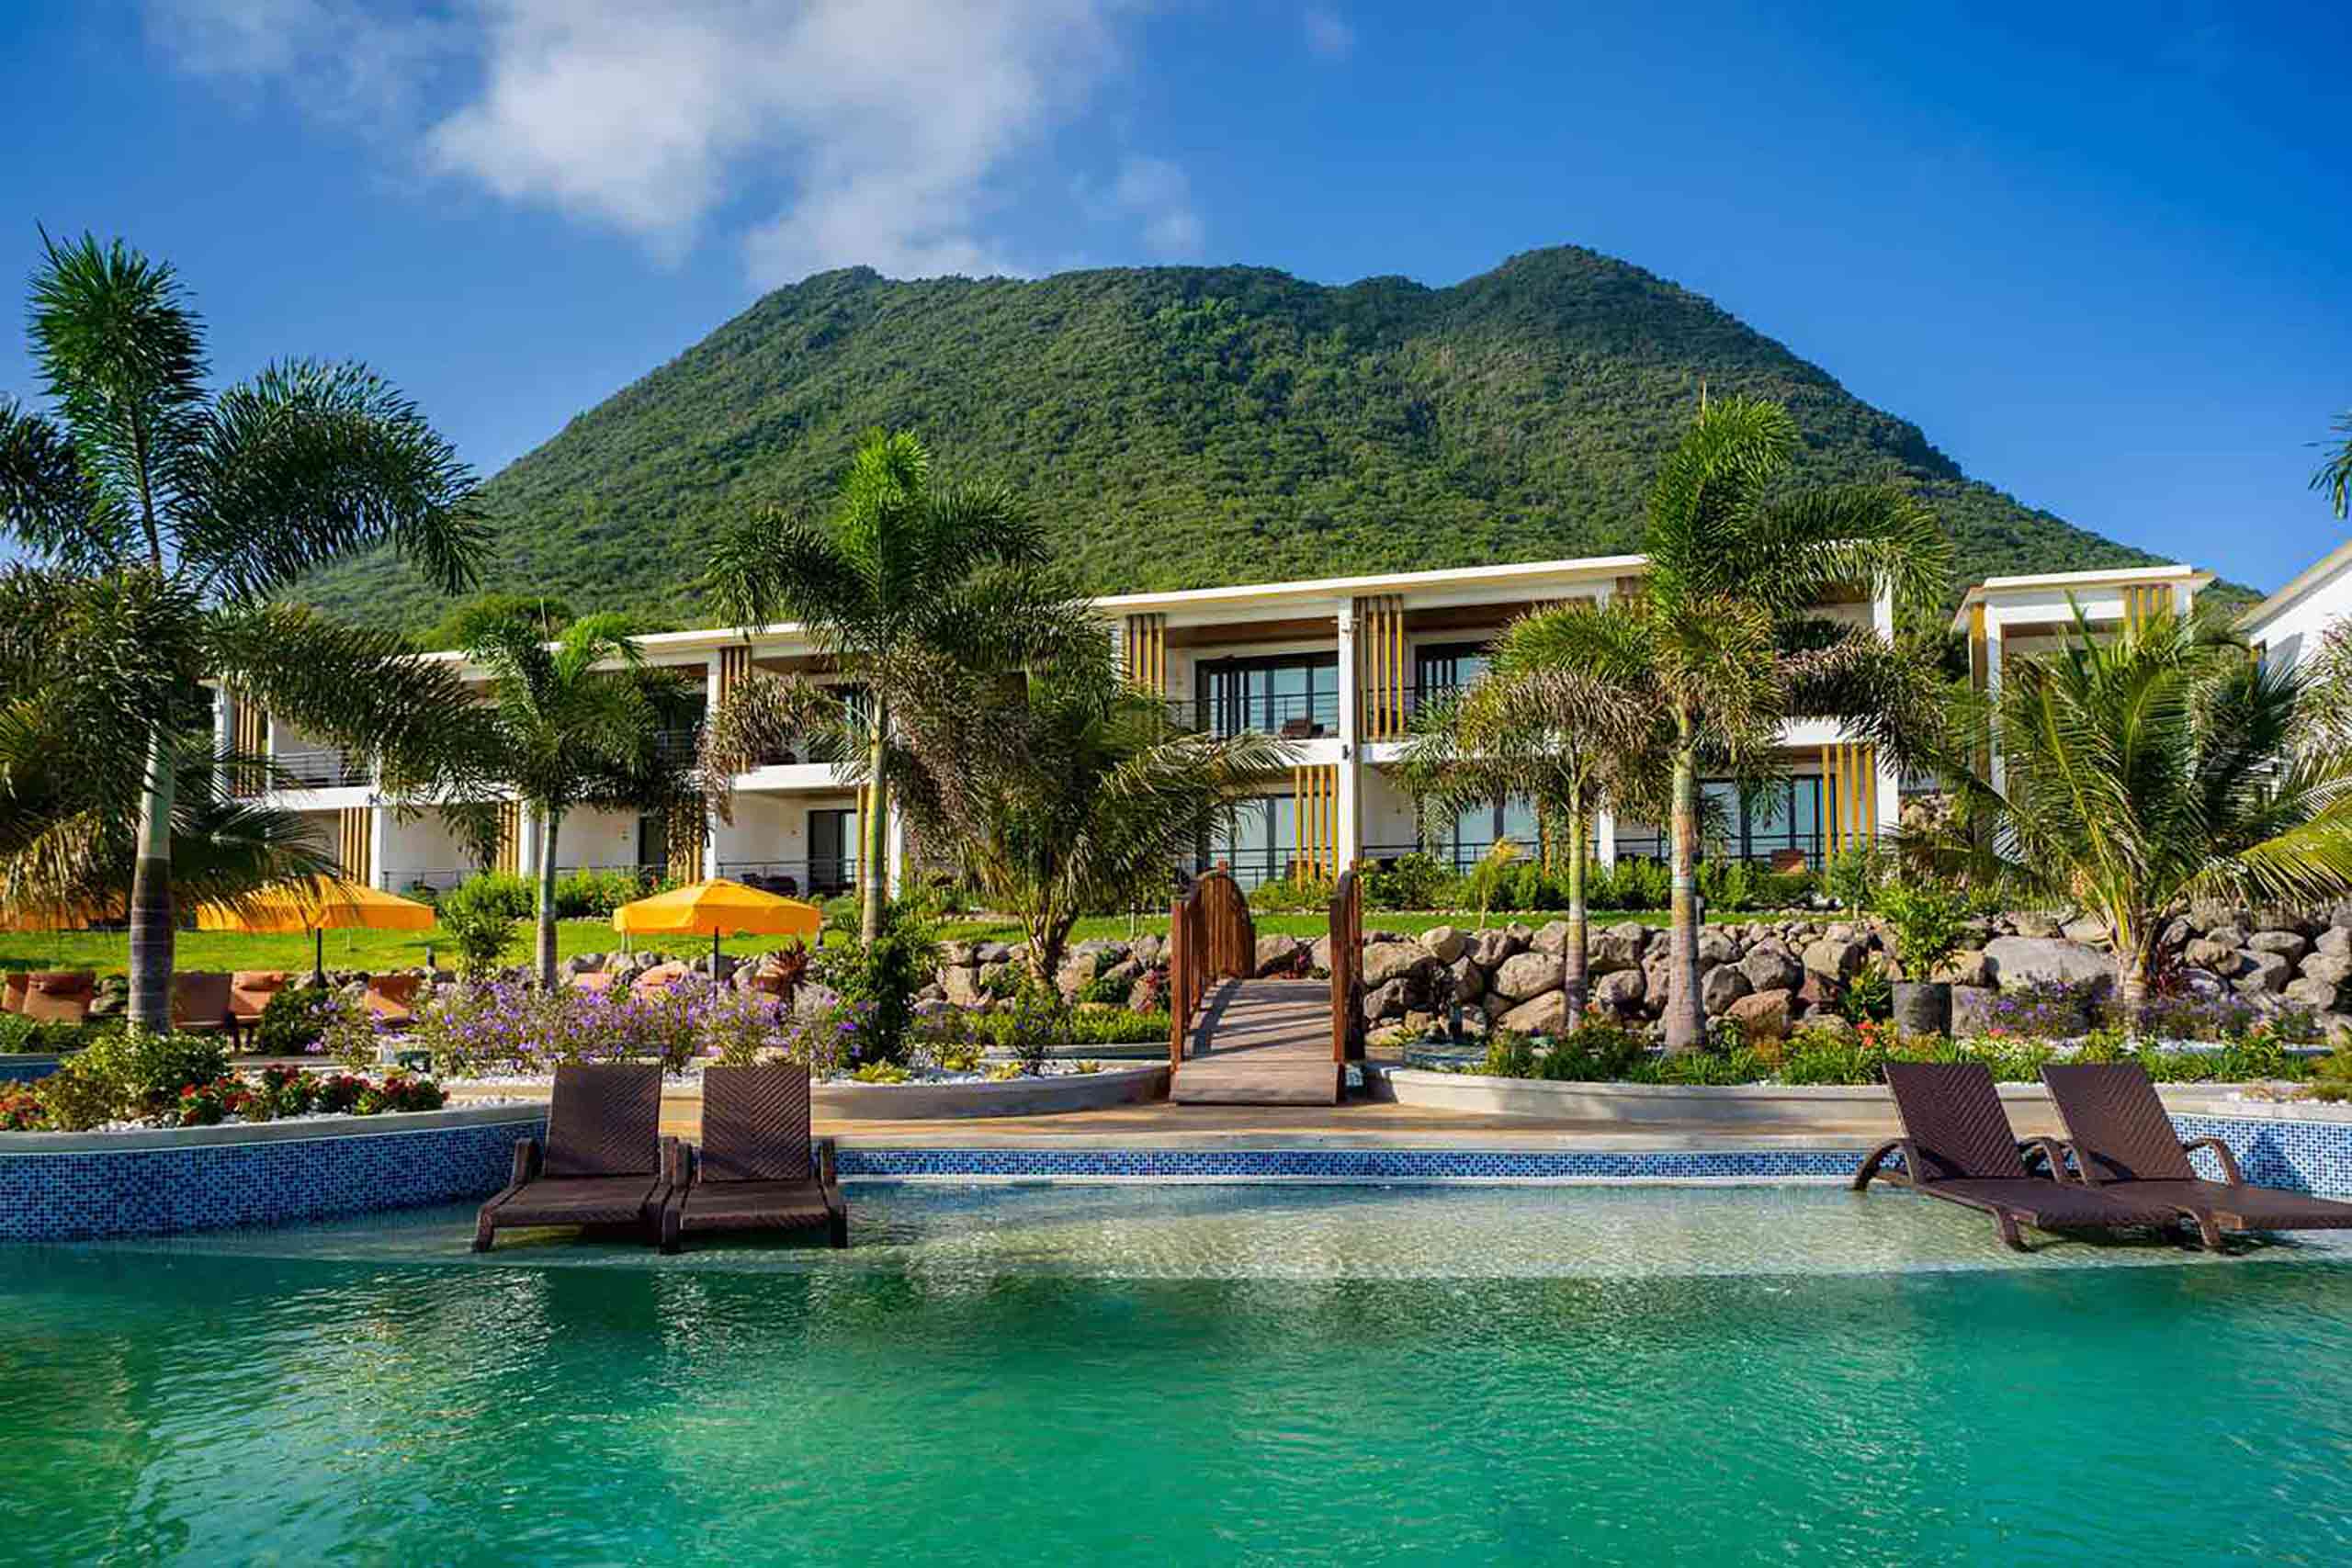 Golden Rock Resort outdoor pool with a lush green mountain in view.